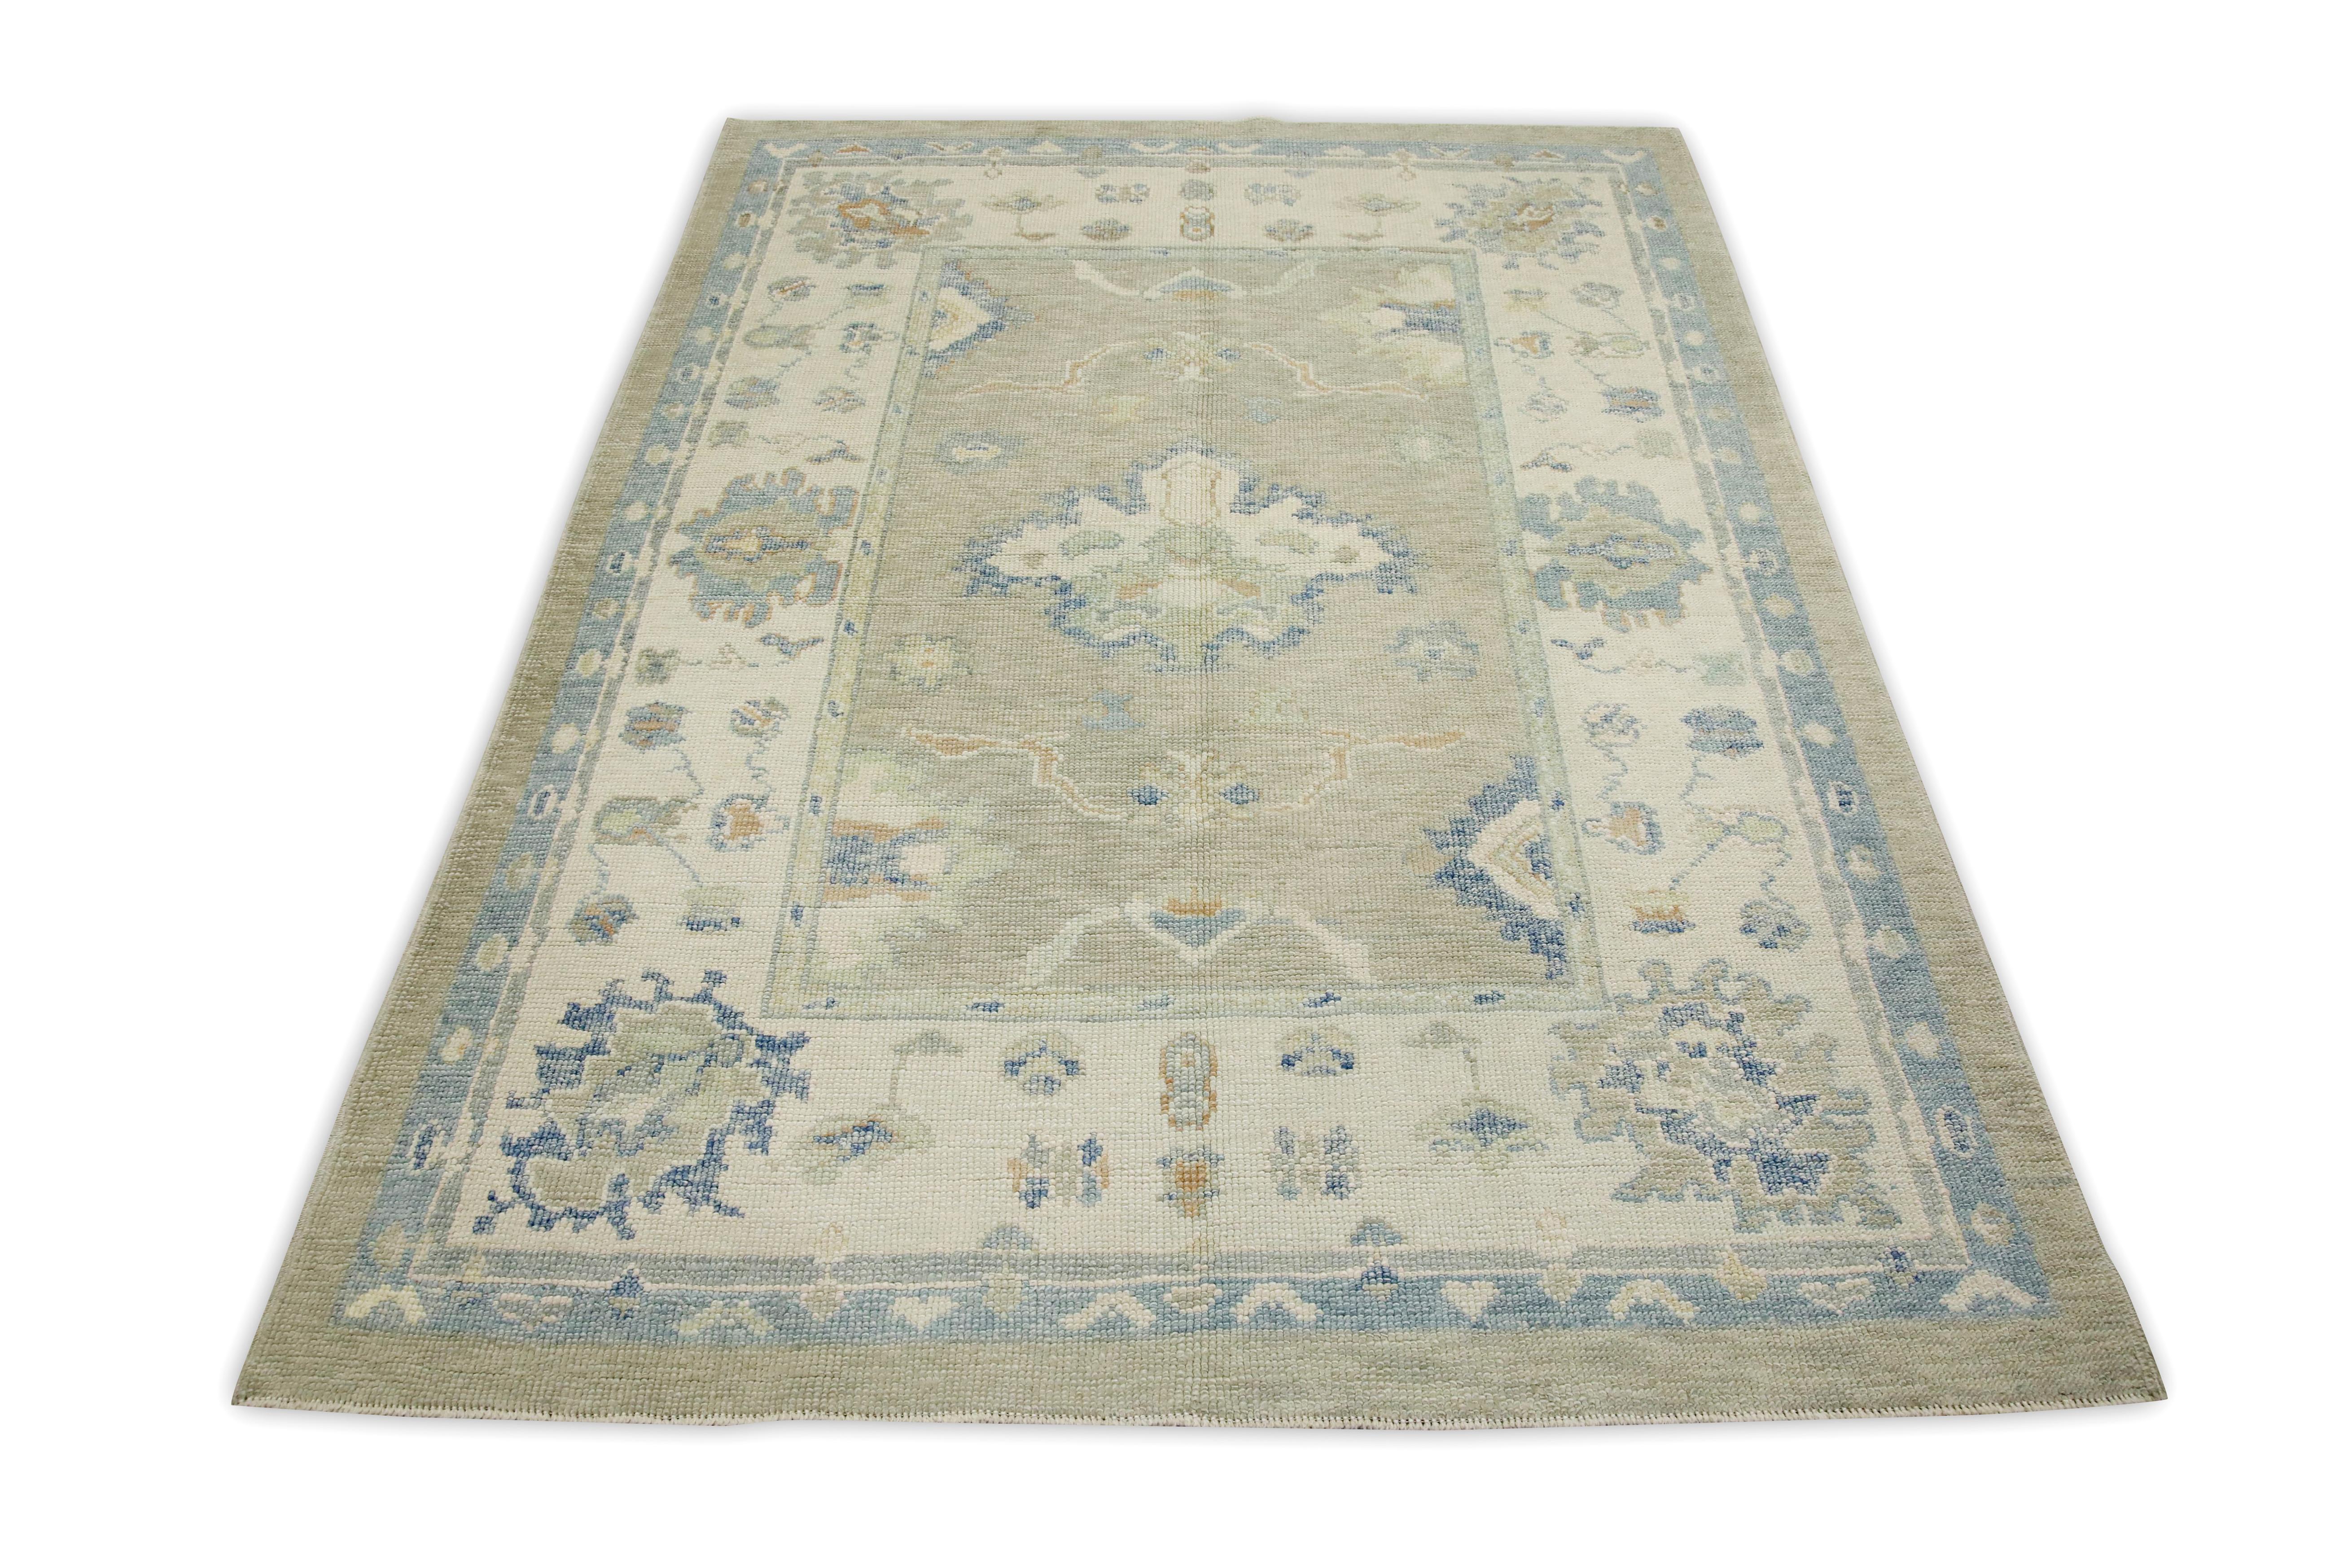 Contemporary Blue & Green Floral Design Handwoven Wool Turkish Oushak Rug 5'1